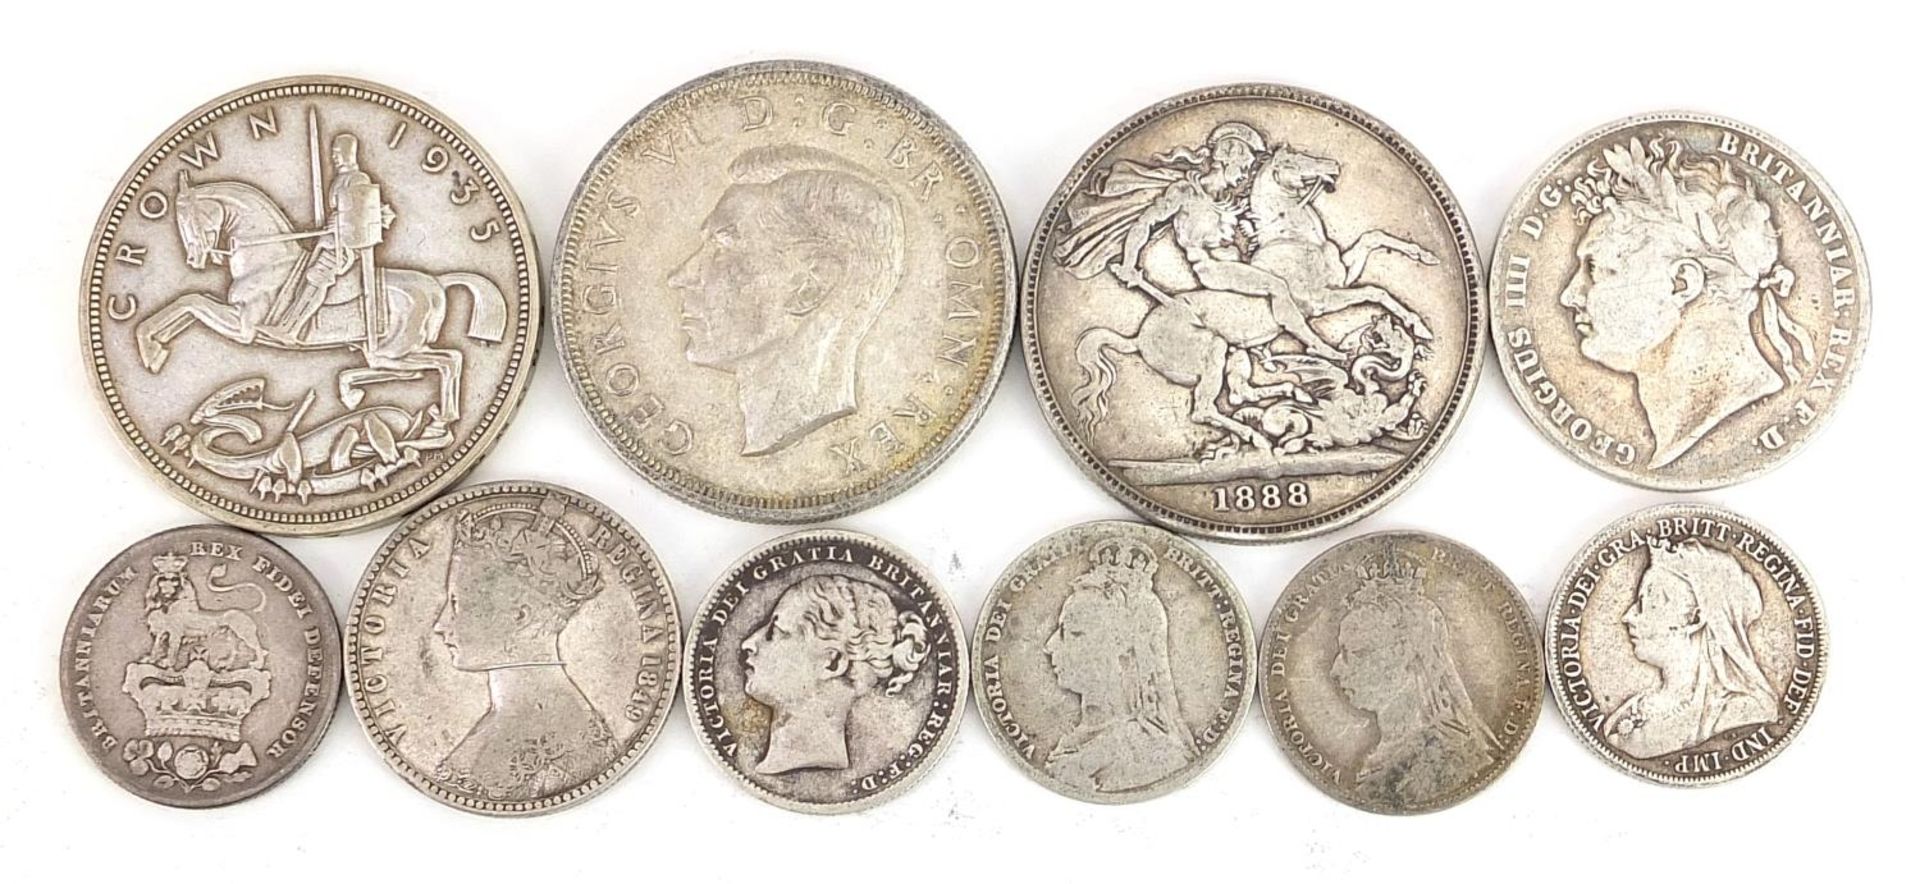 William IV and later British coinage including 1888 crown, Gothic florin and George IV 1826 - Image 2 of 3